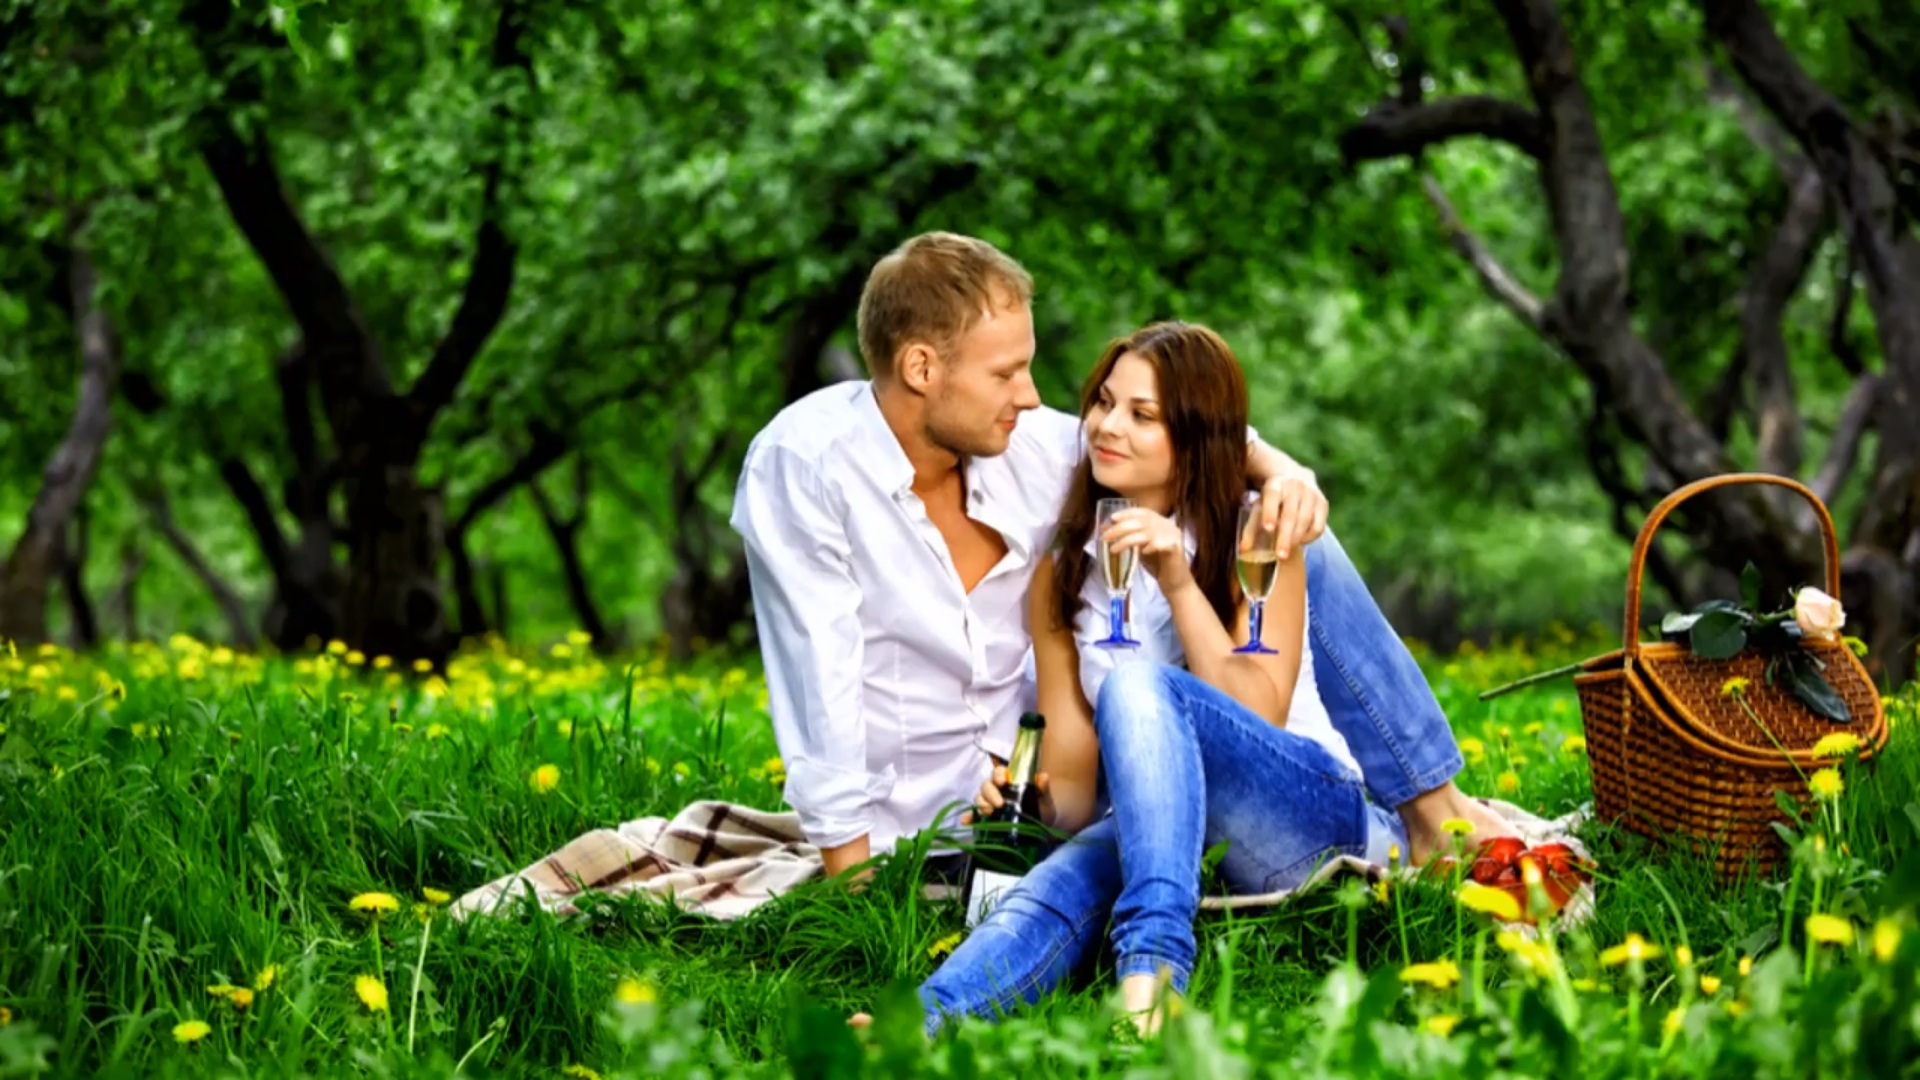 Love Pictures Enamoured Couple On Picnic In Nature Wallpaper Hd